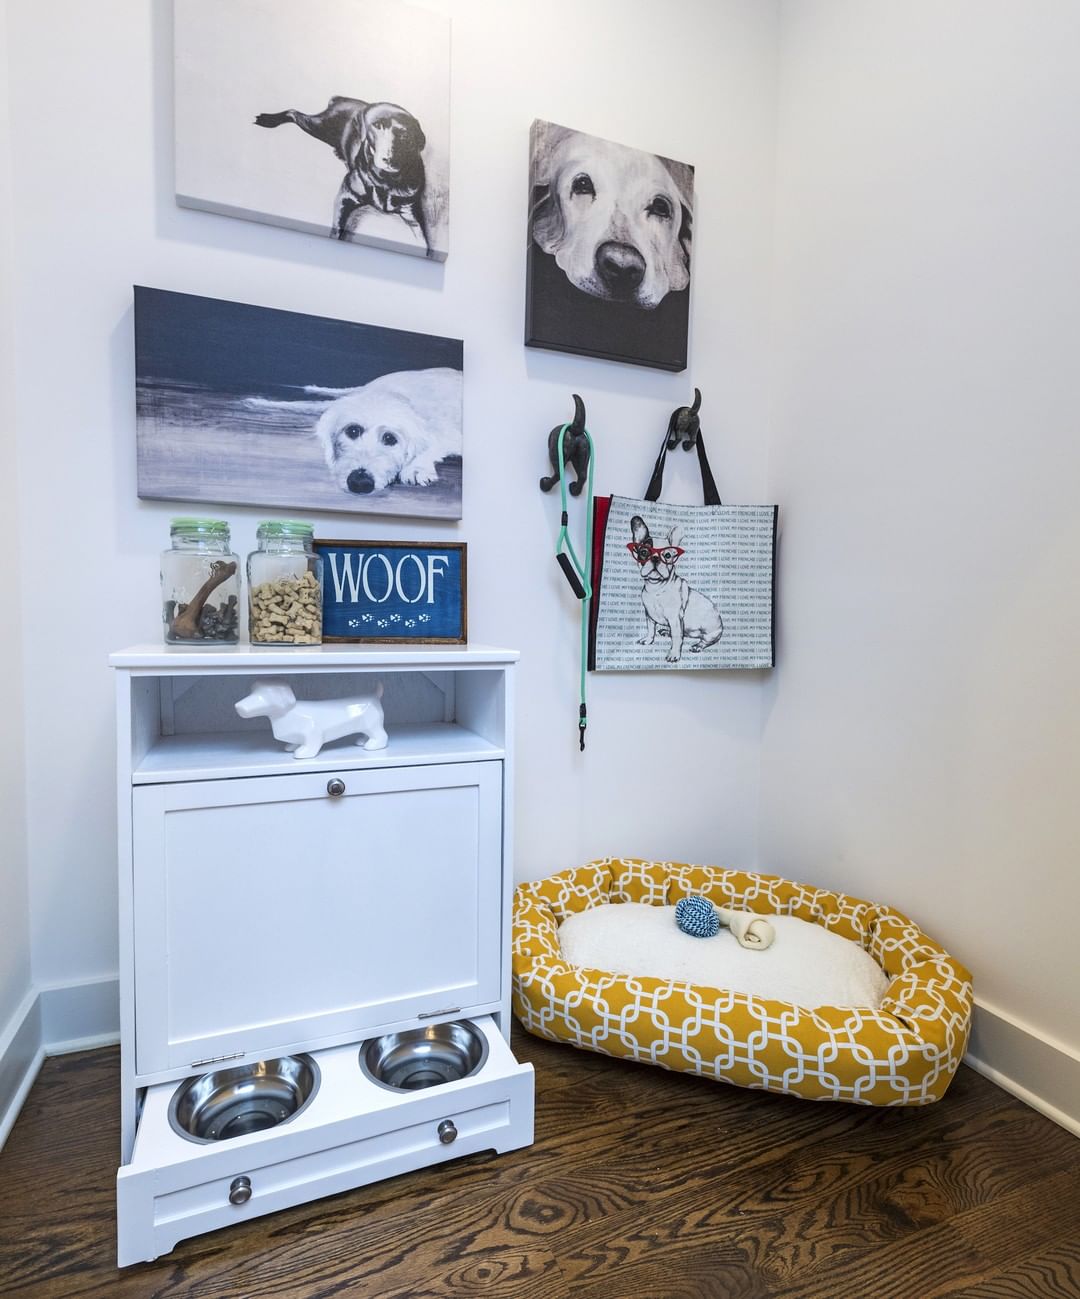 Pet Feeder Built Into Storage Unit. Photo by Instagram user @livejwcollection